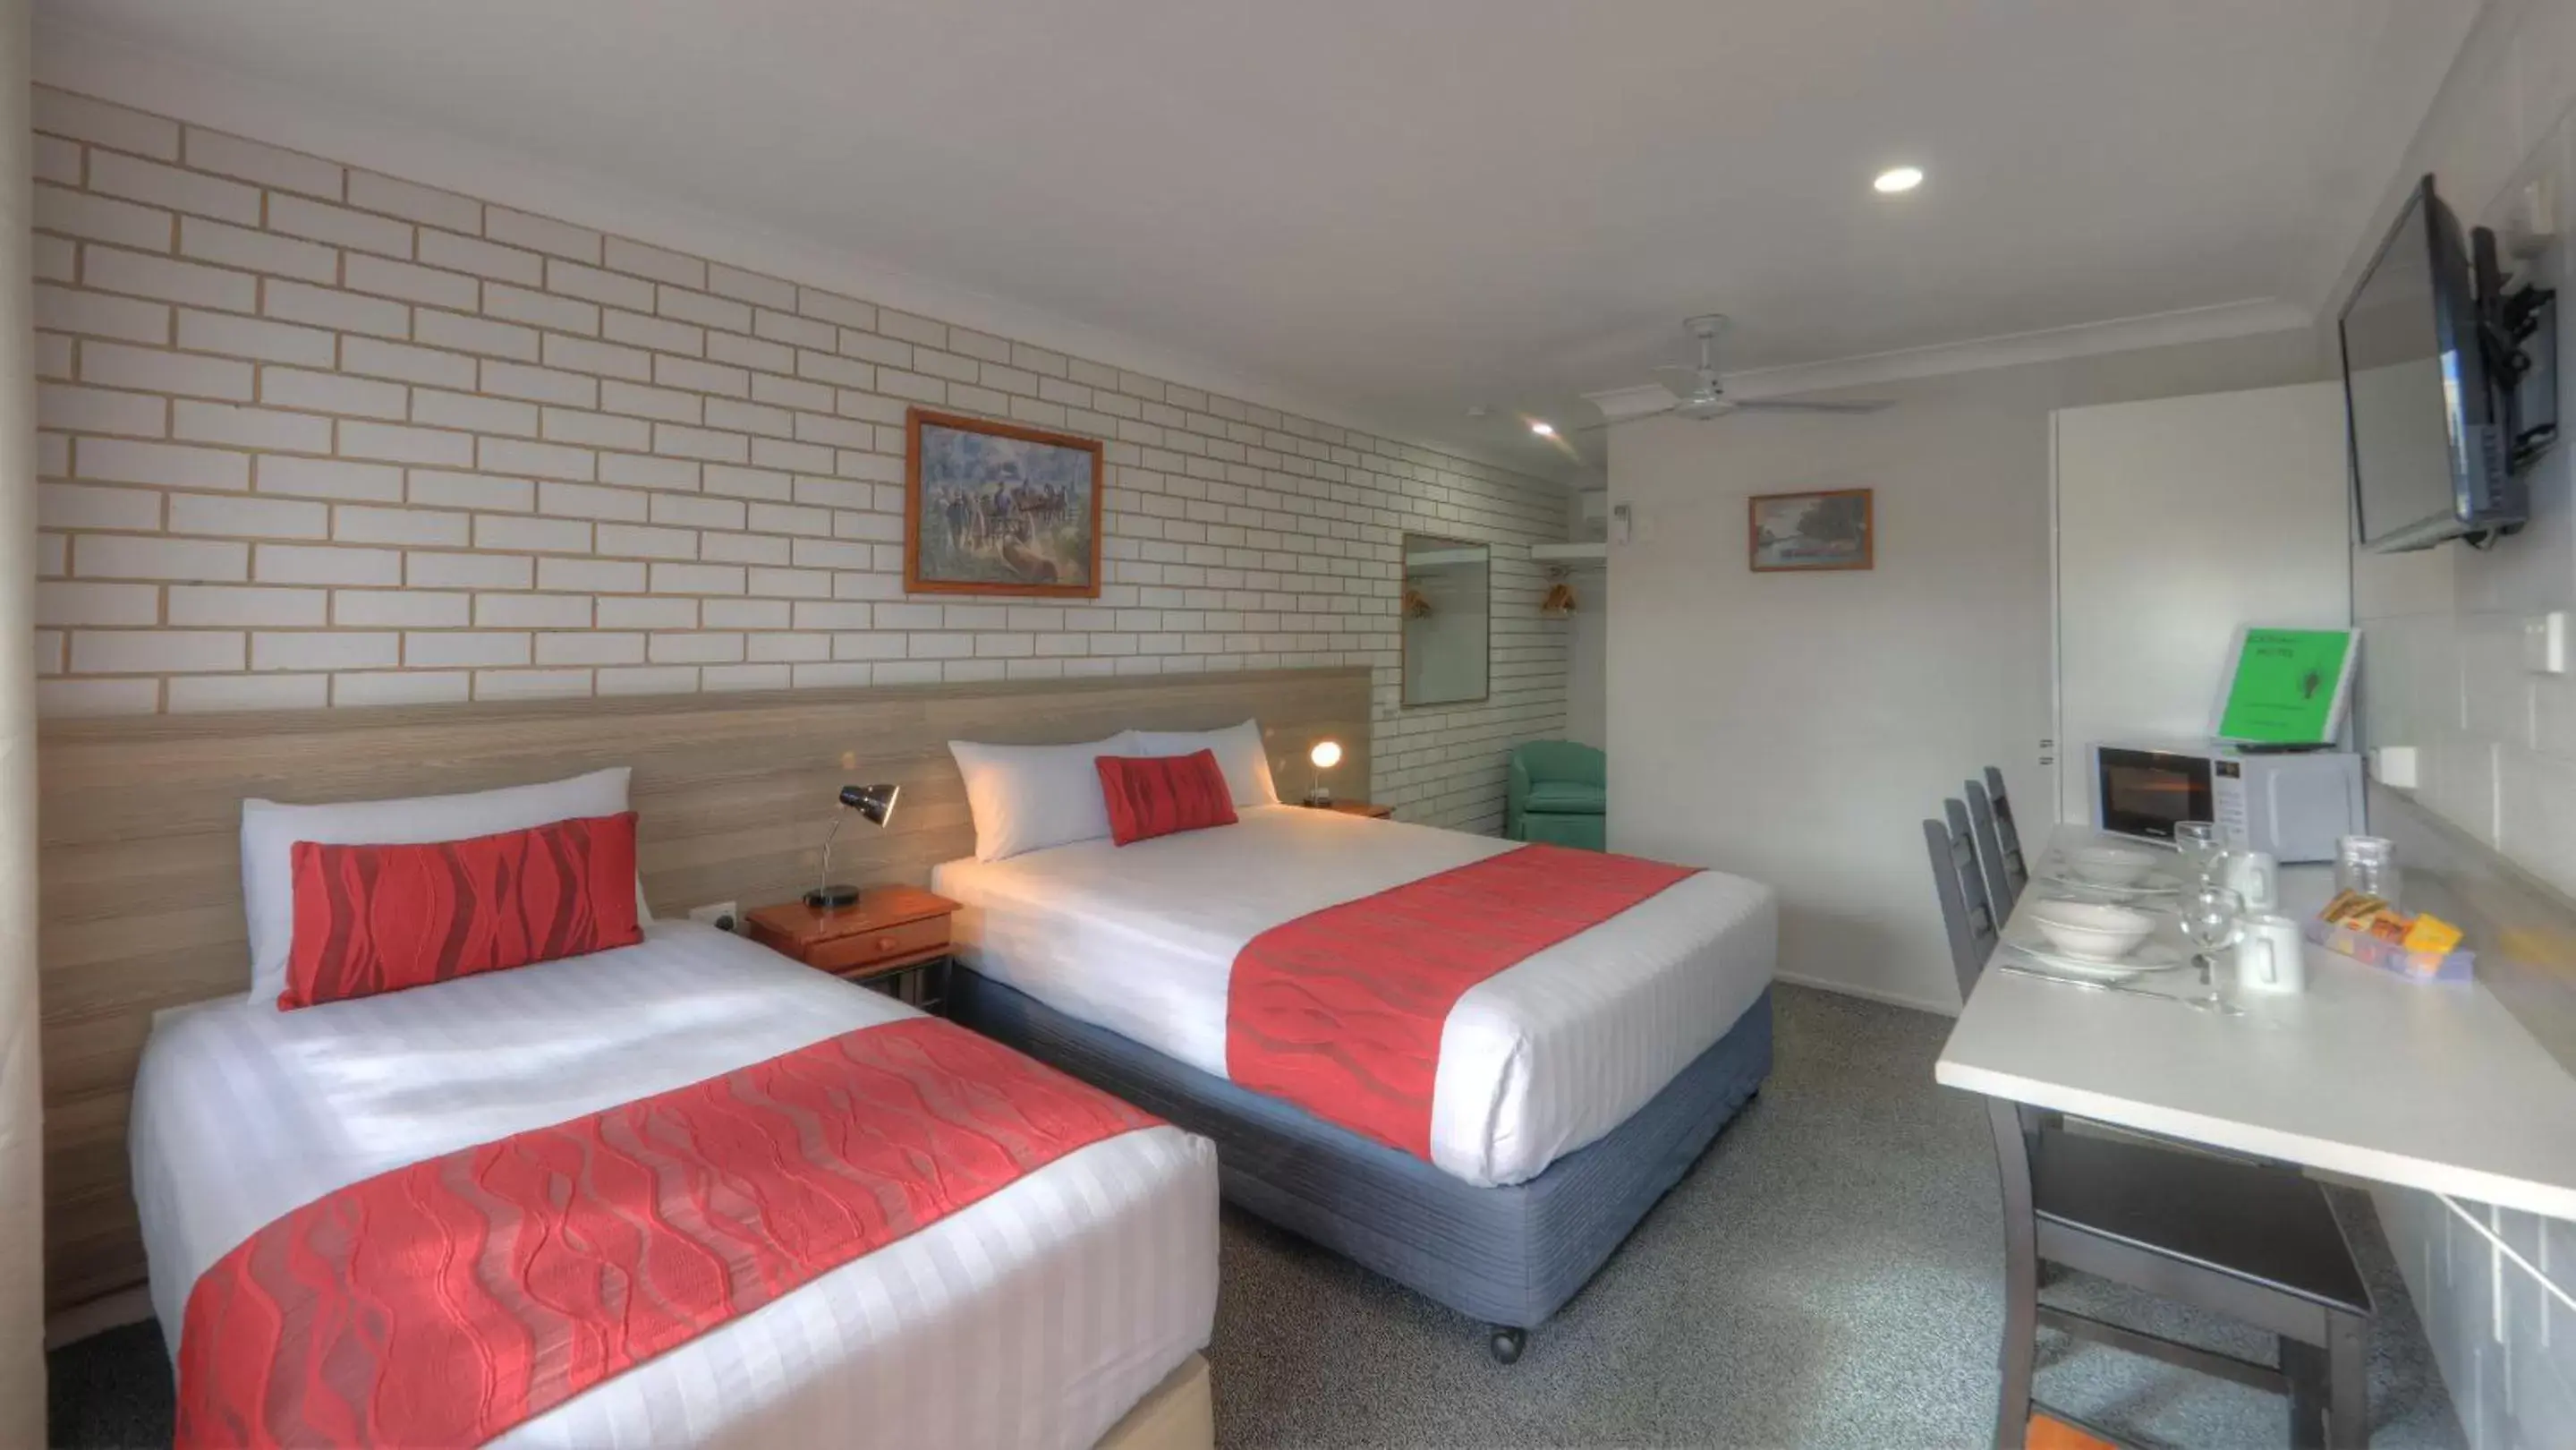 Property building, Bed in Boonah Motel